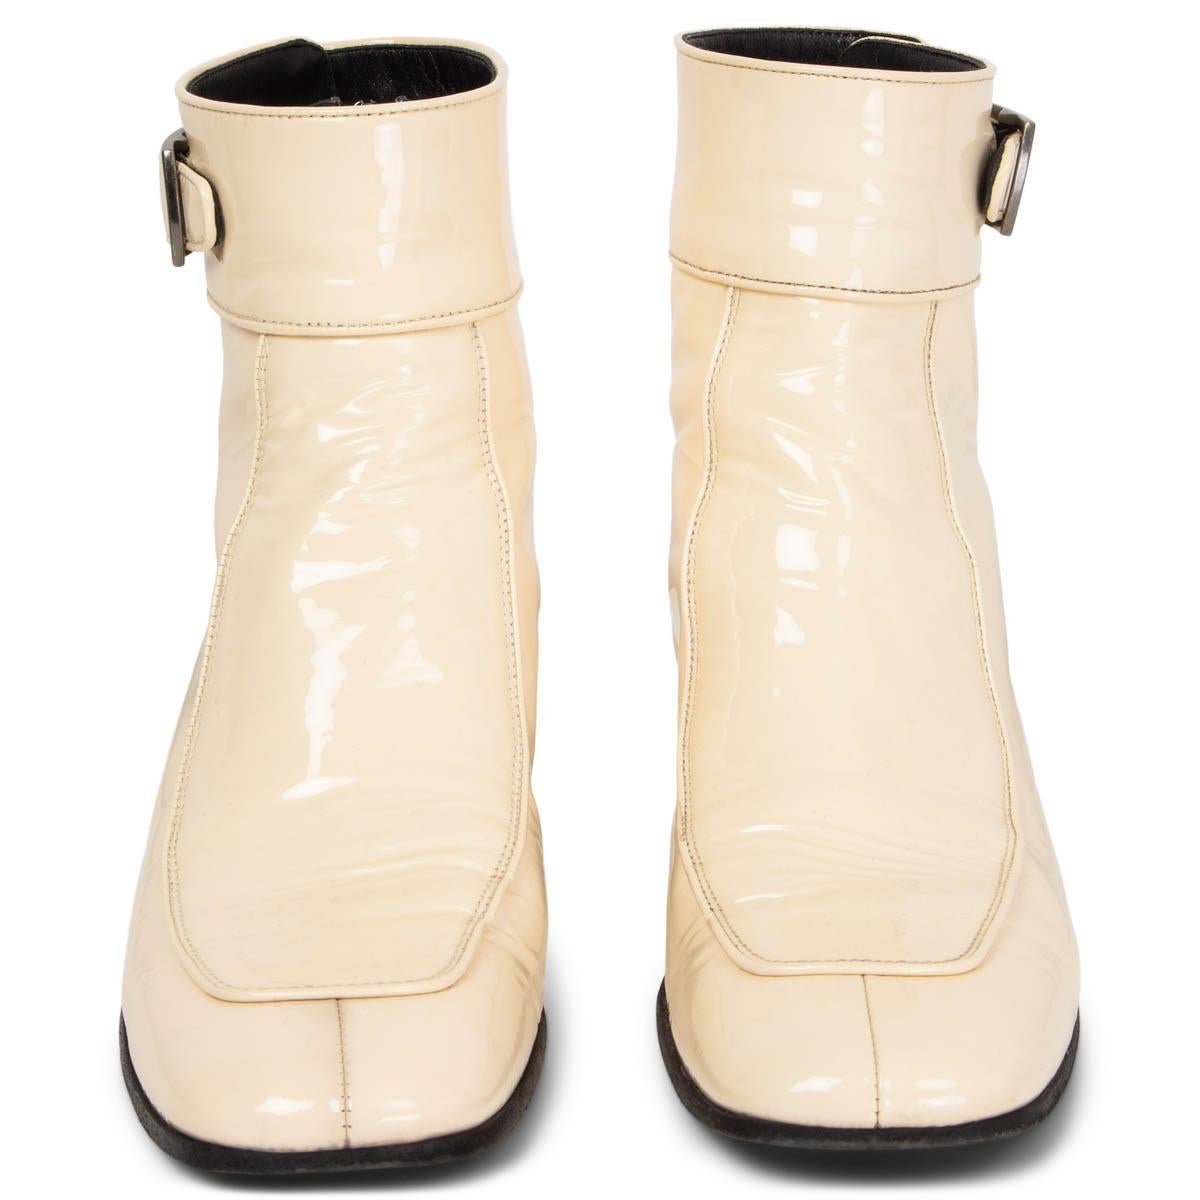 100% authentic Saint Laurent Miles square-toe ankle boots crafted in cream smooth patent leather that are distressed by hand to create a subtle crinkled effect and decorated with a simple gunmetal buckle above a low stacked heel. Opens with a zipper